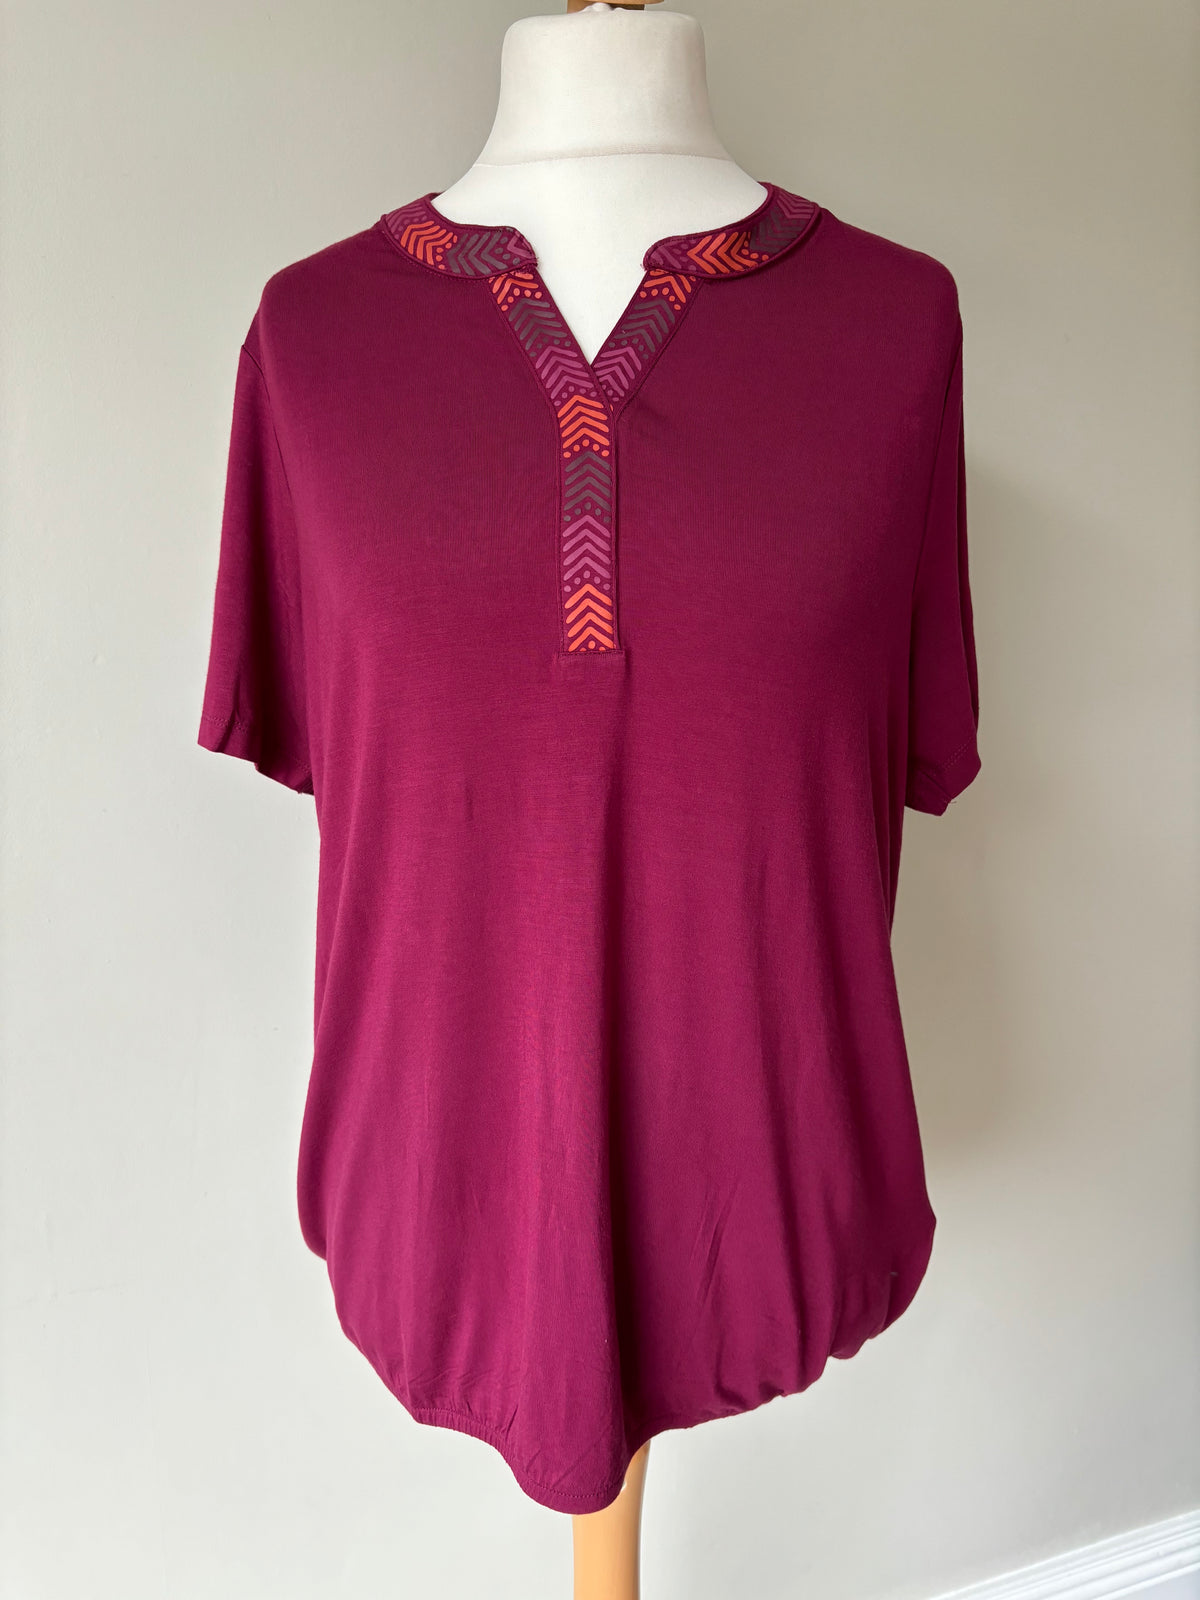 Burgundy tunic top by Freemans  Size 18